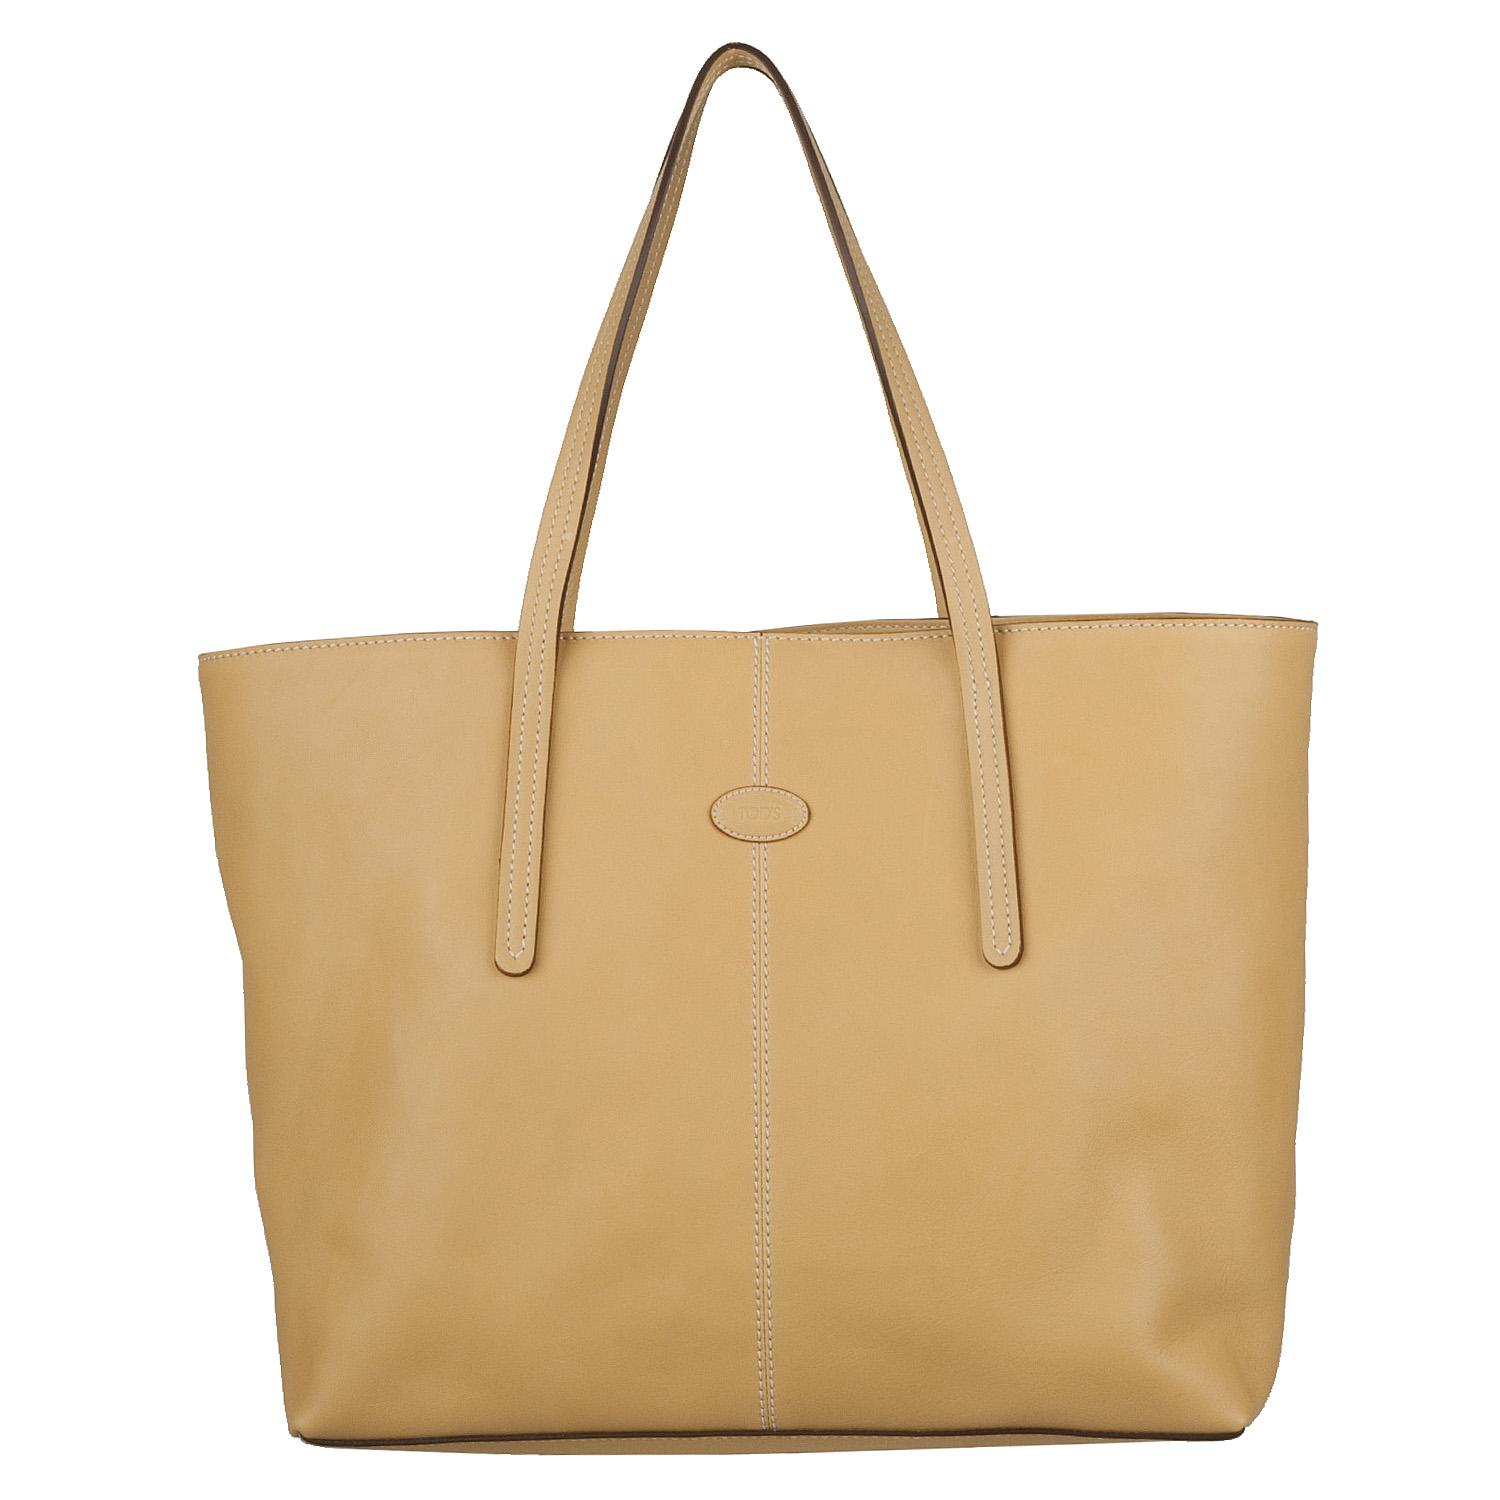 Tods Toujours Medium Leather Tote Bag